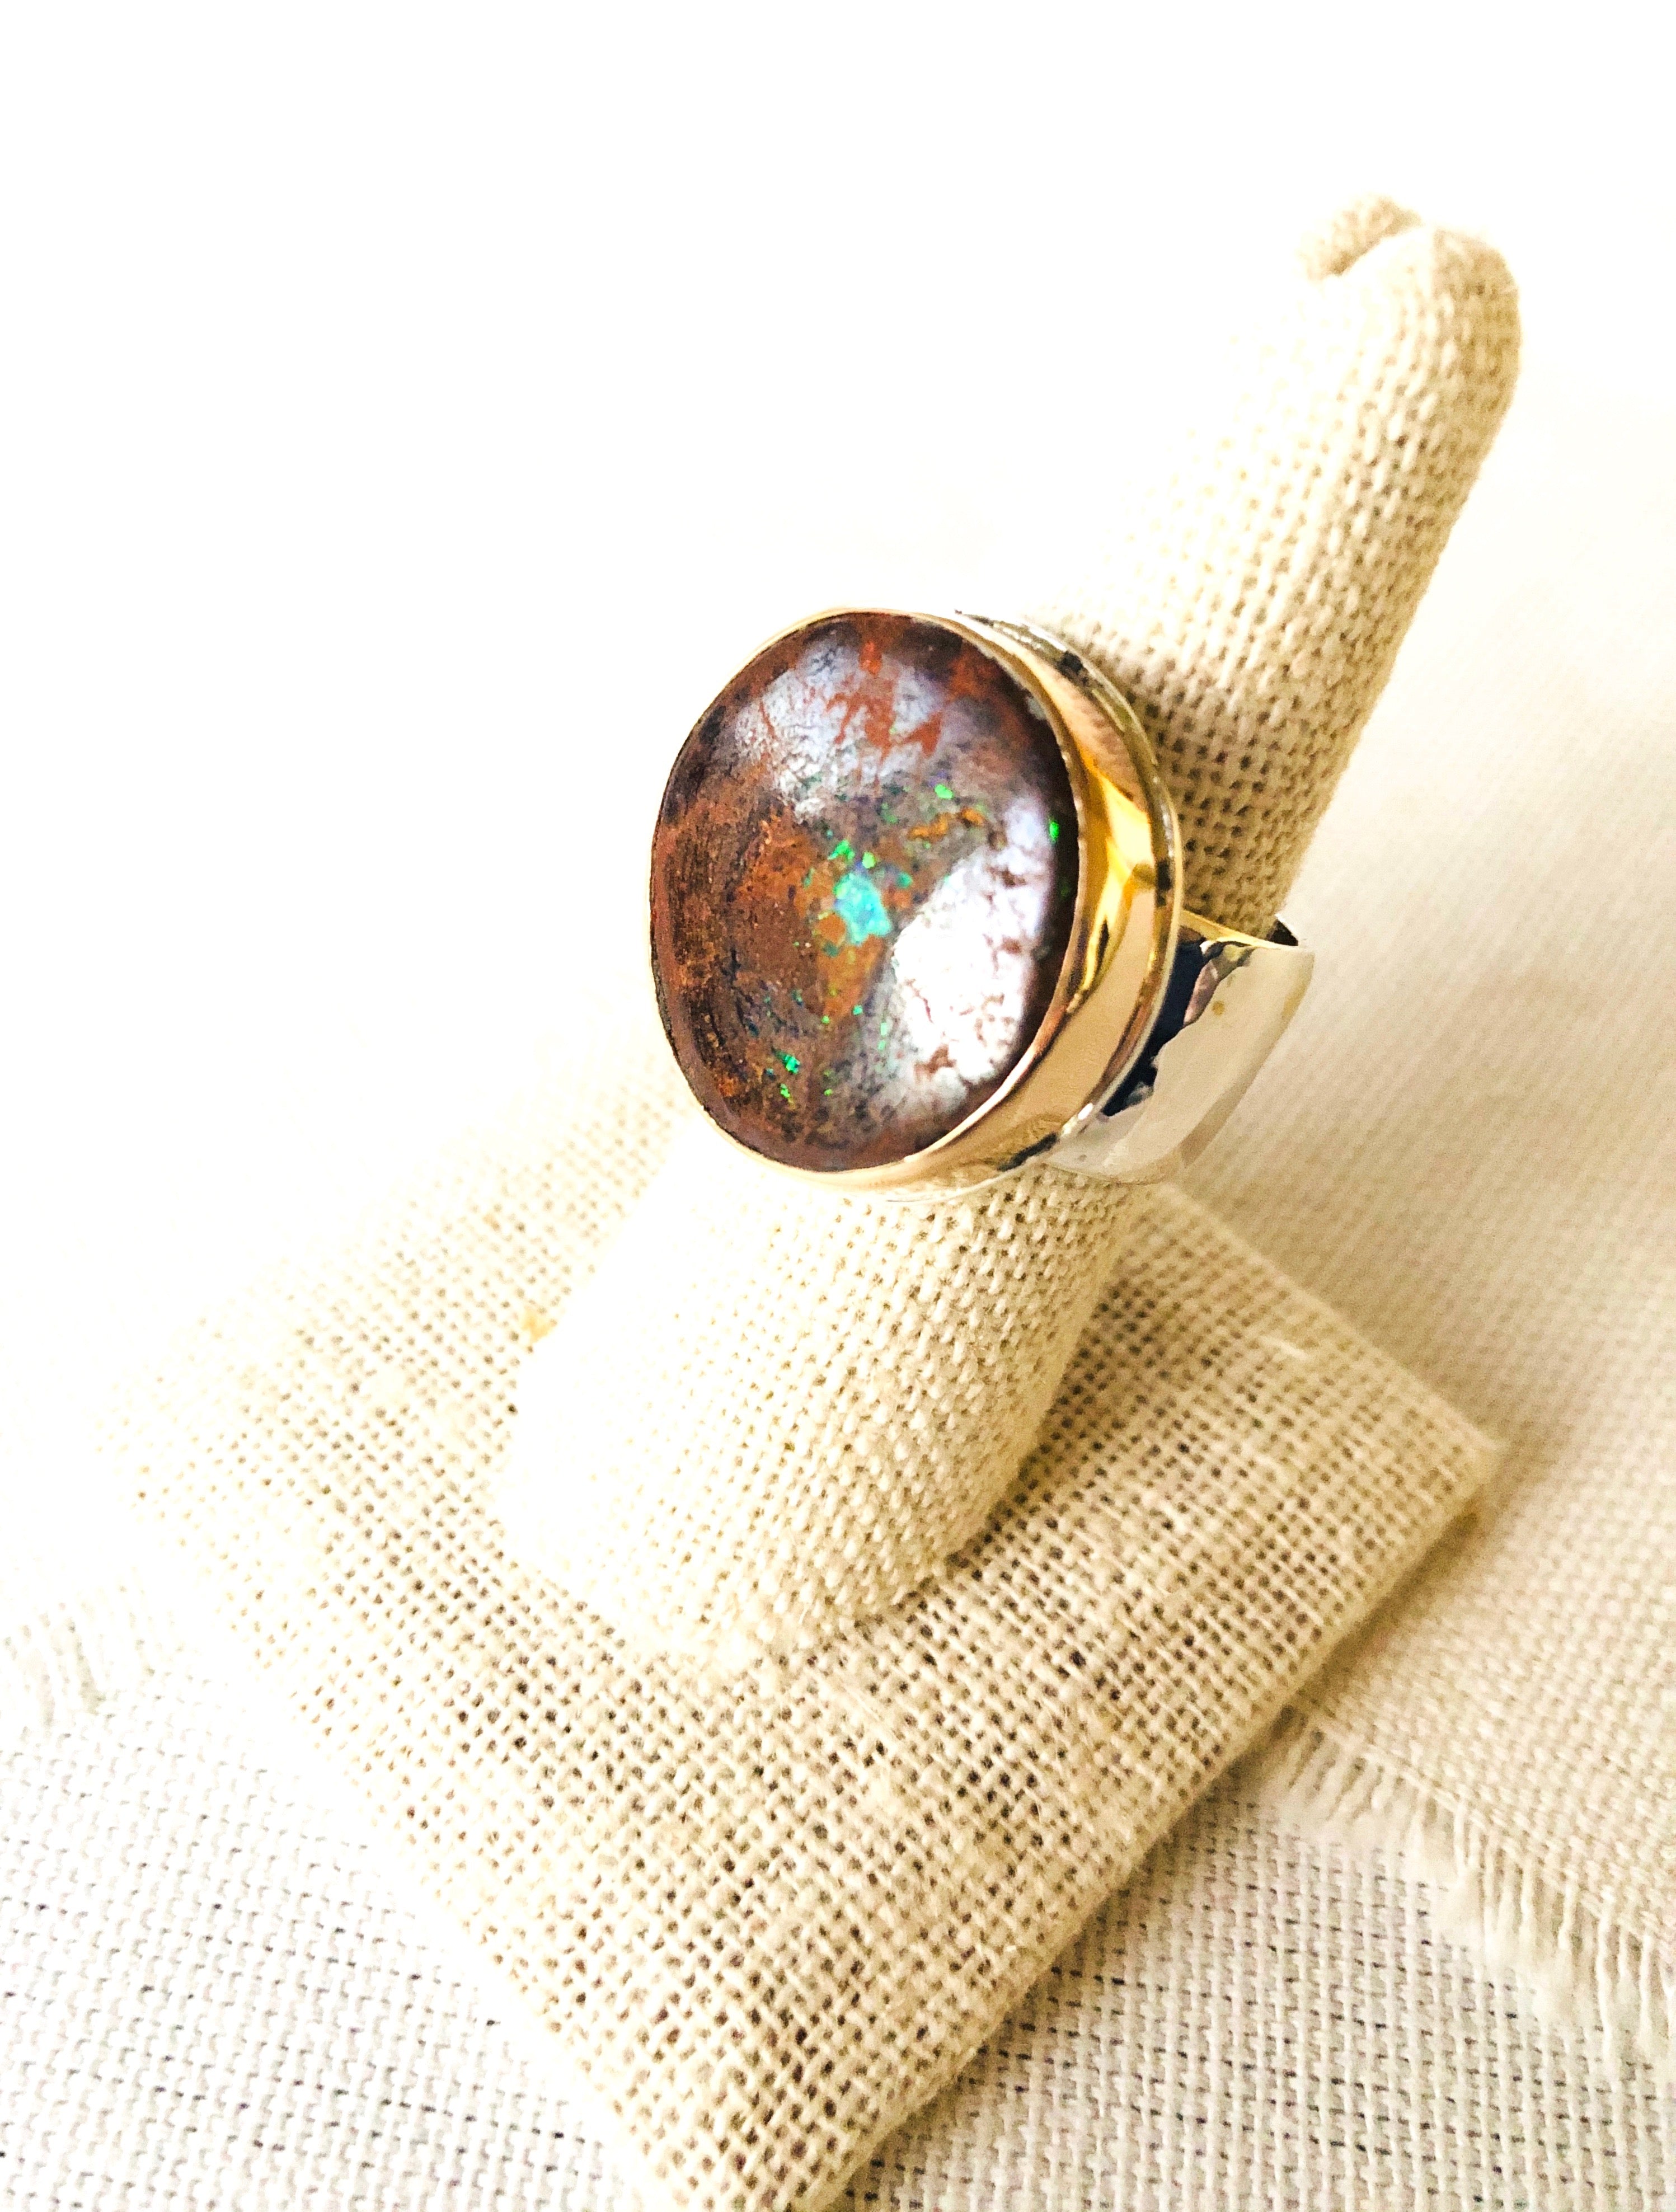 The contrasting colors of this Australian Yowah Nut Opal ring is so striking.  This one of a kind Australian Opal is known as Yowah Nut Opal is set in 14kt gold and sterling silver.